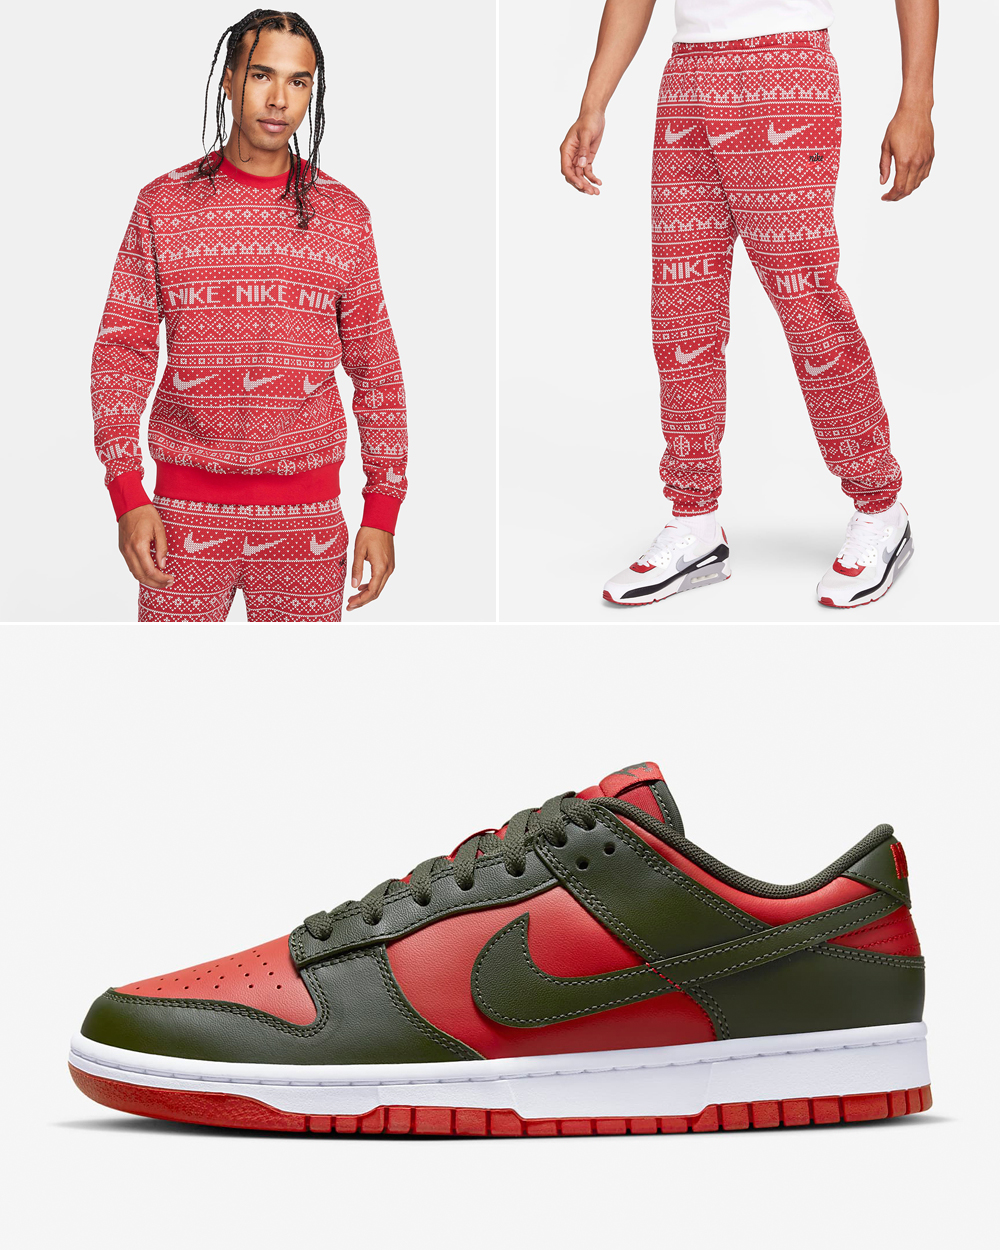 Nike-Dunk-Low-Mystic-Red-Outfit-1